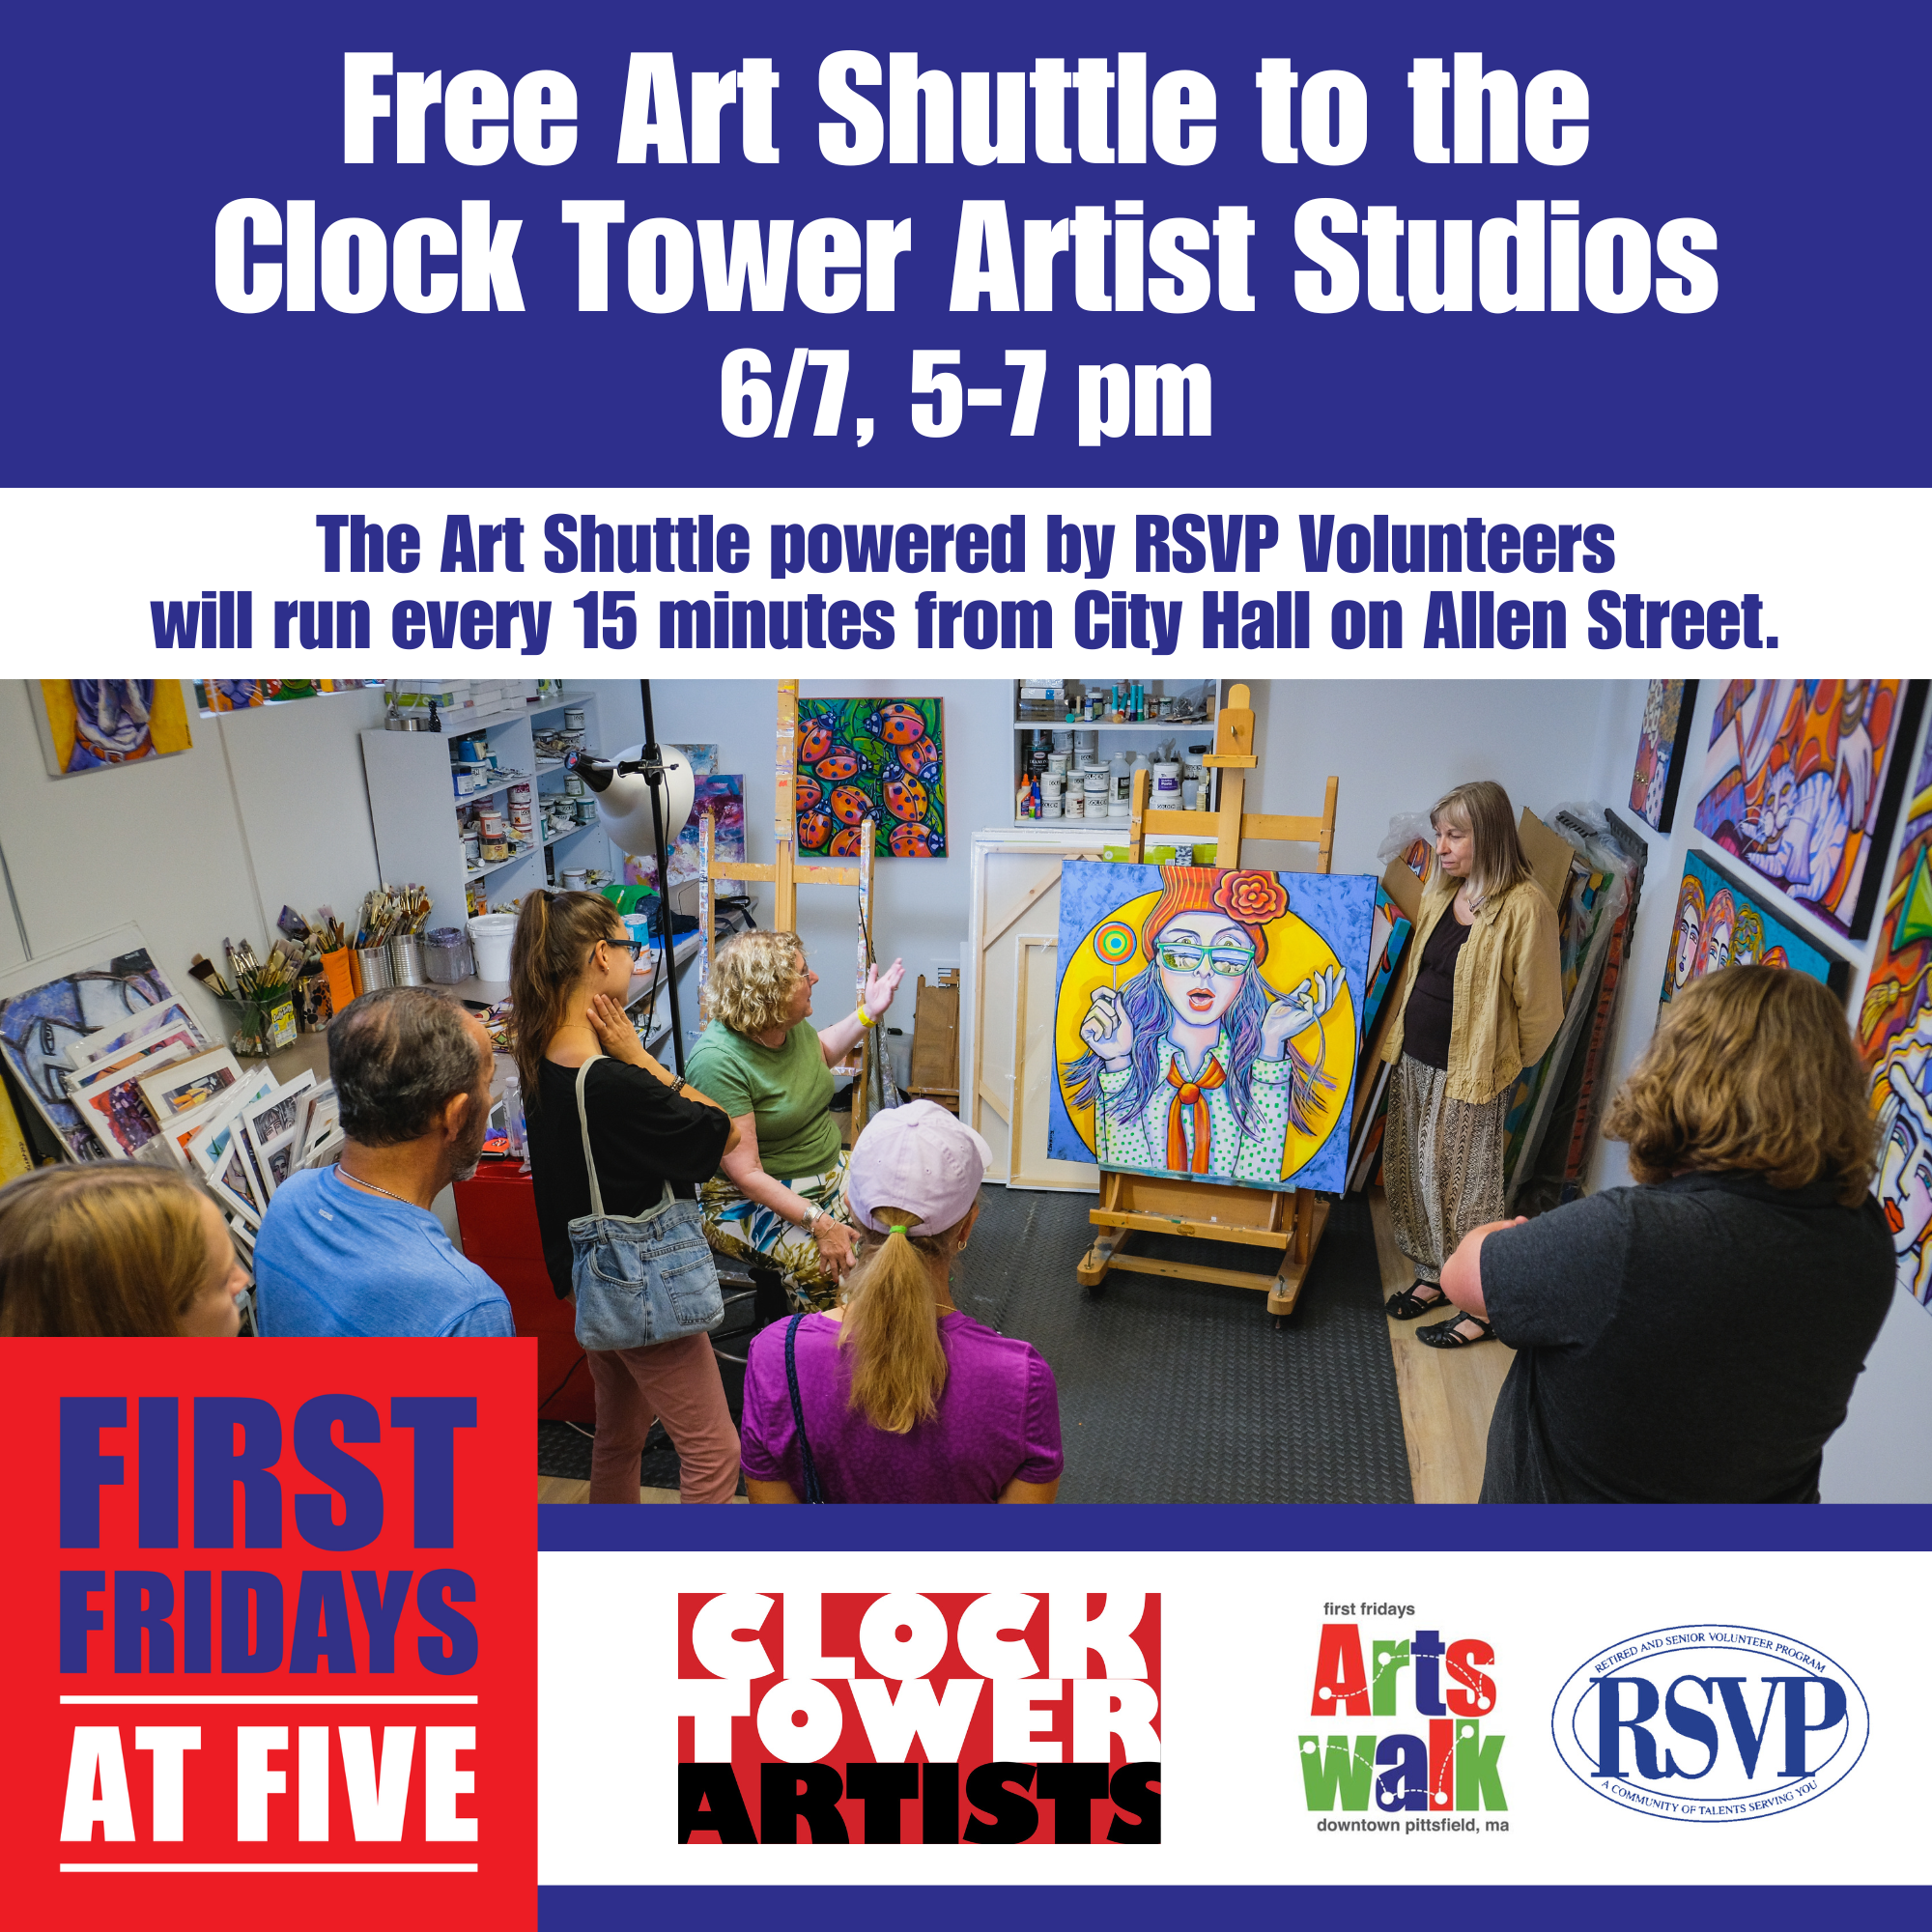 Art Shuttle to Clock Tower Artists First Fridays at Five